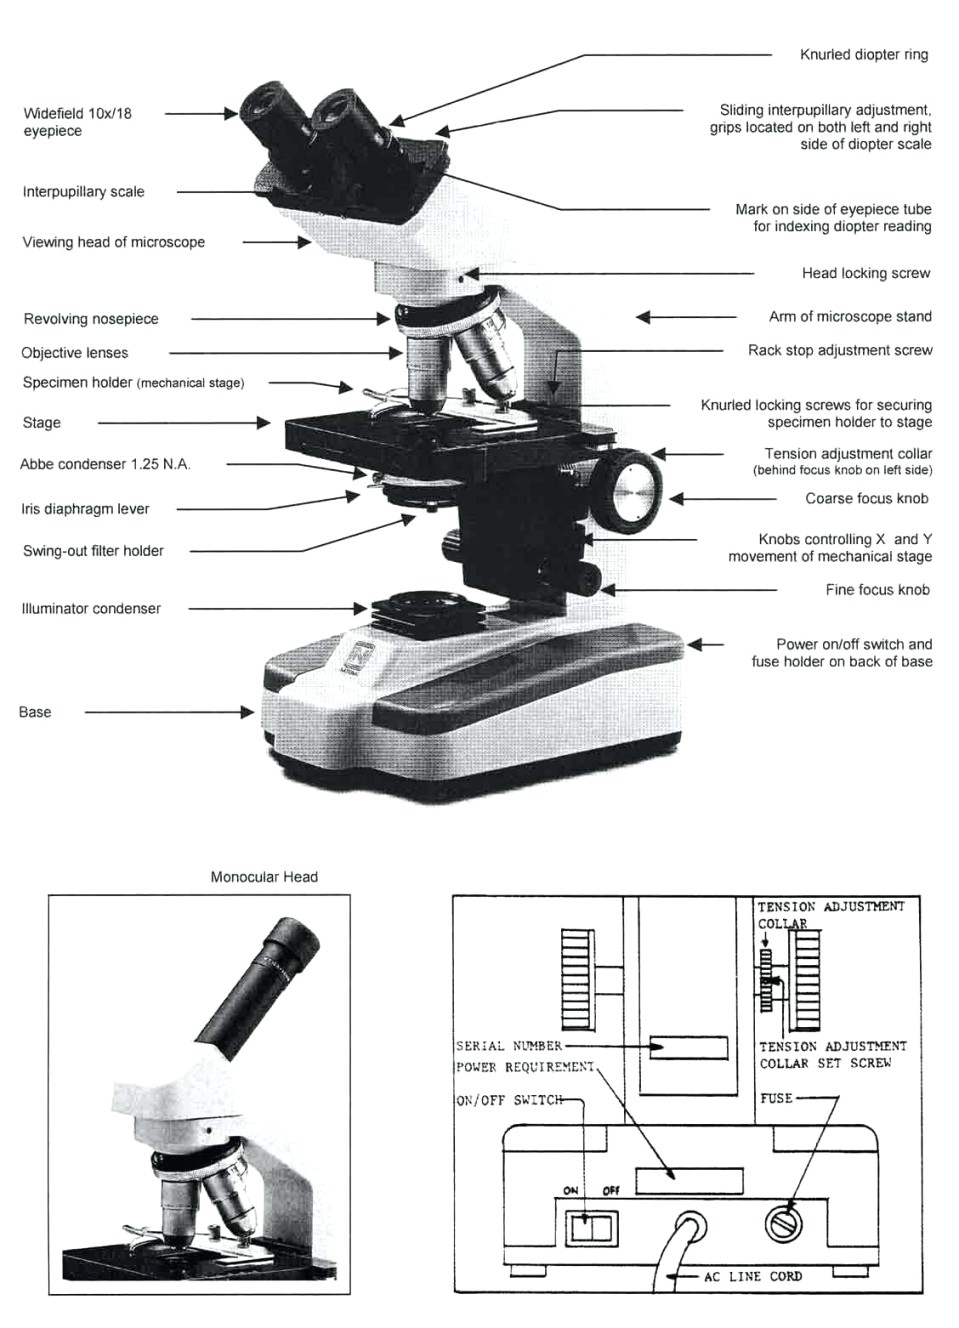 microscope-drawing-worksheet-at-paintingvalley-explore-collection-of-microscope-drawing